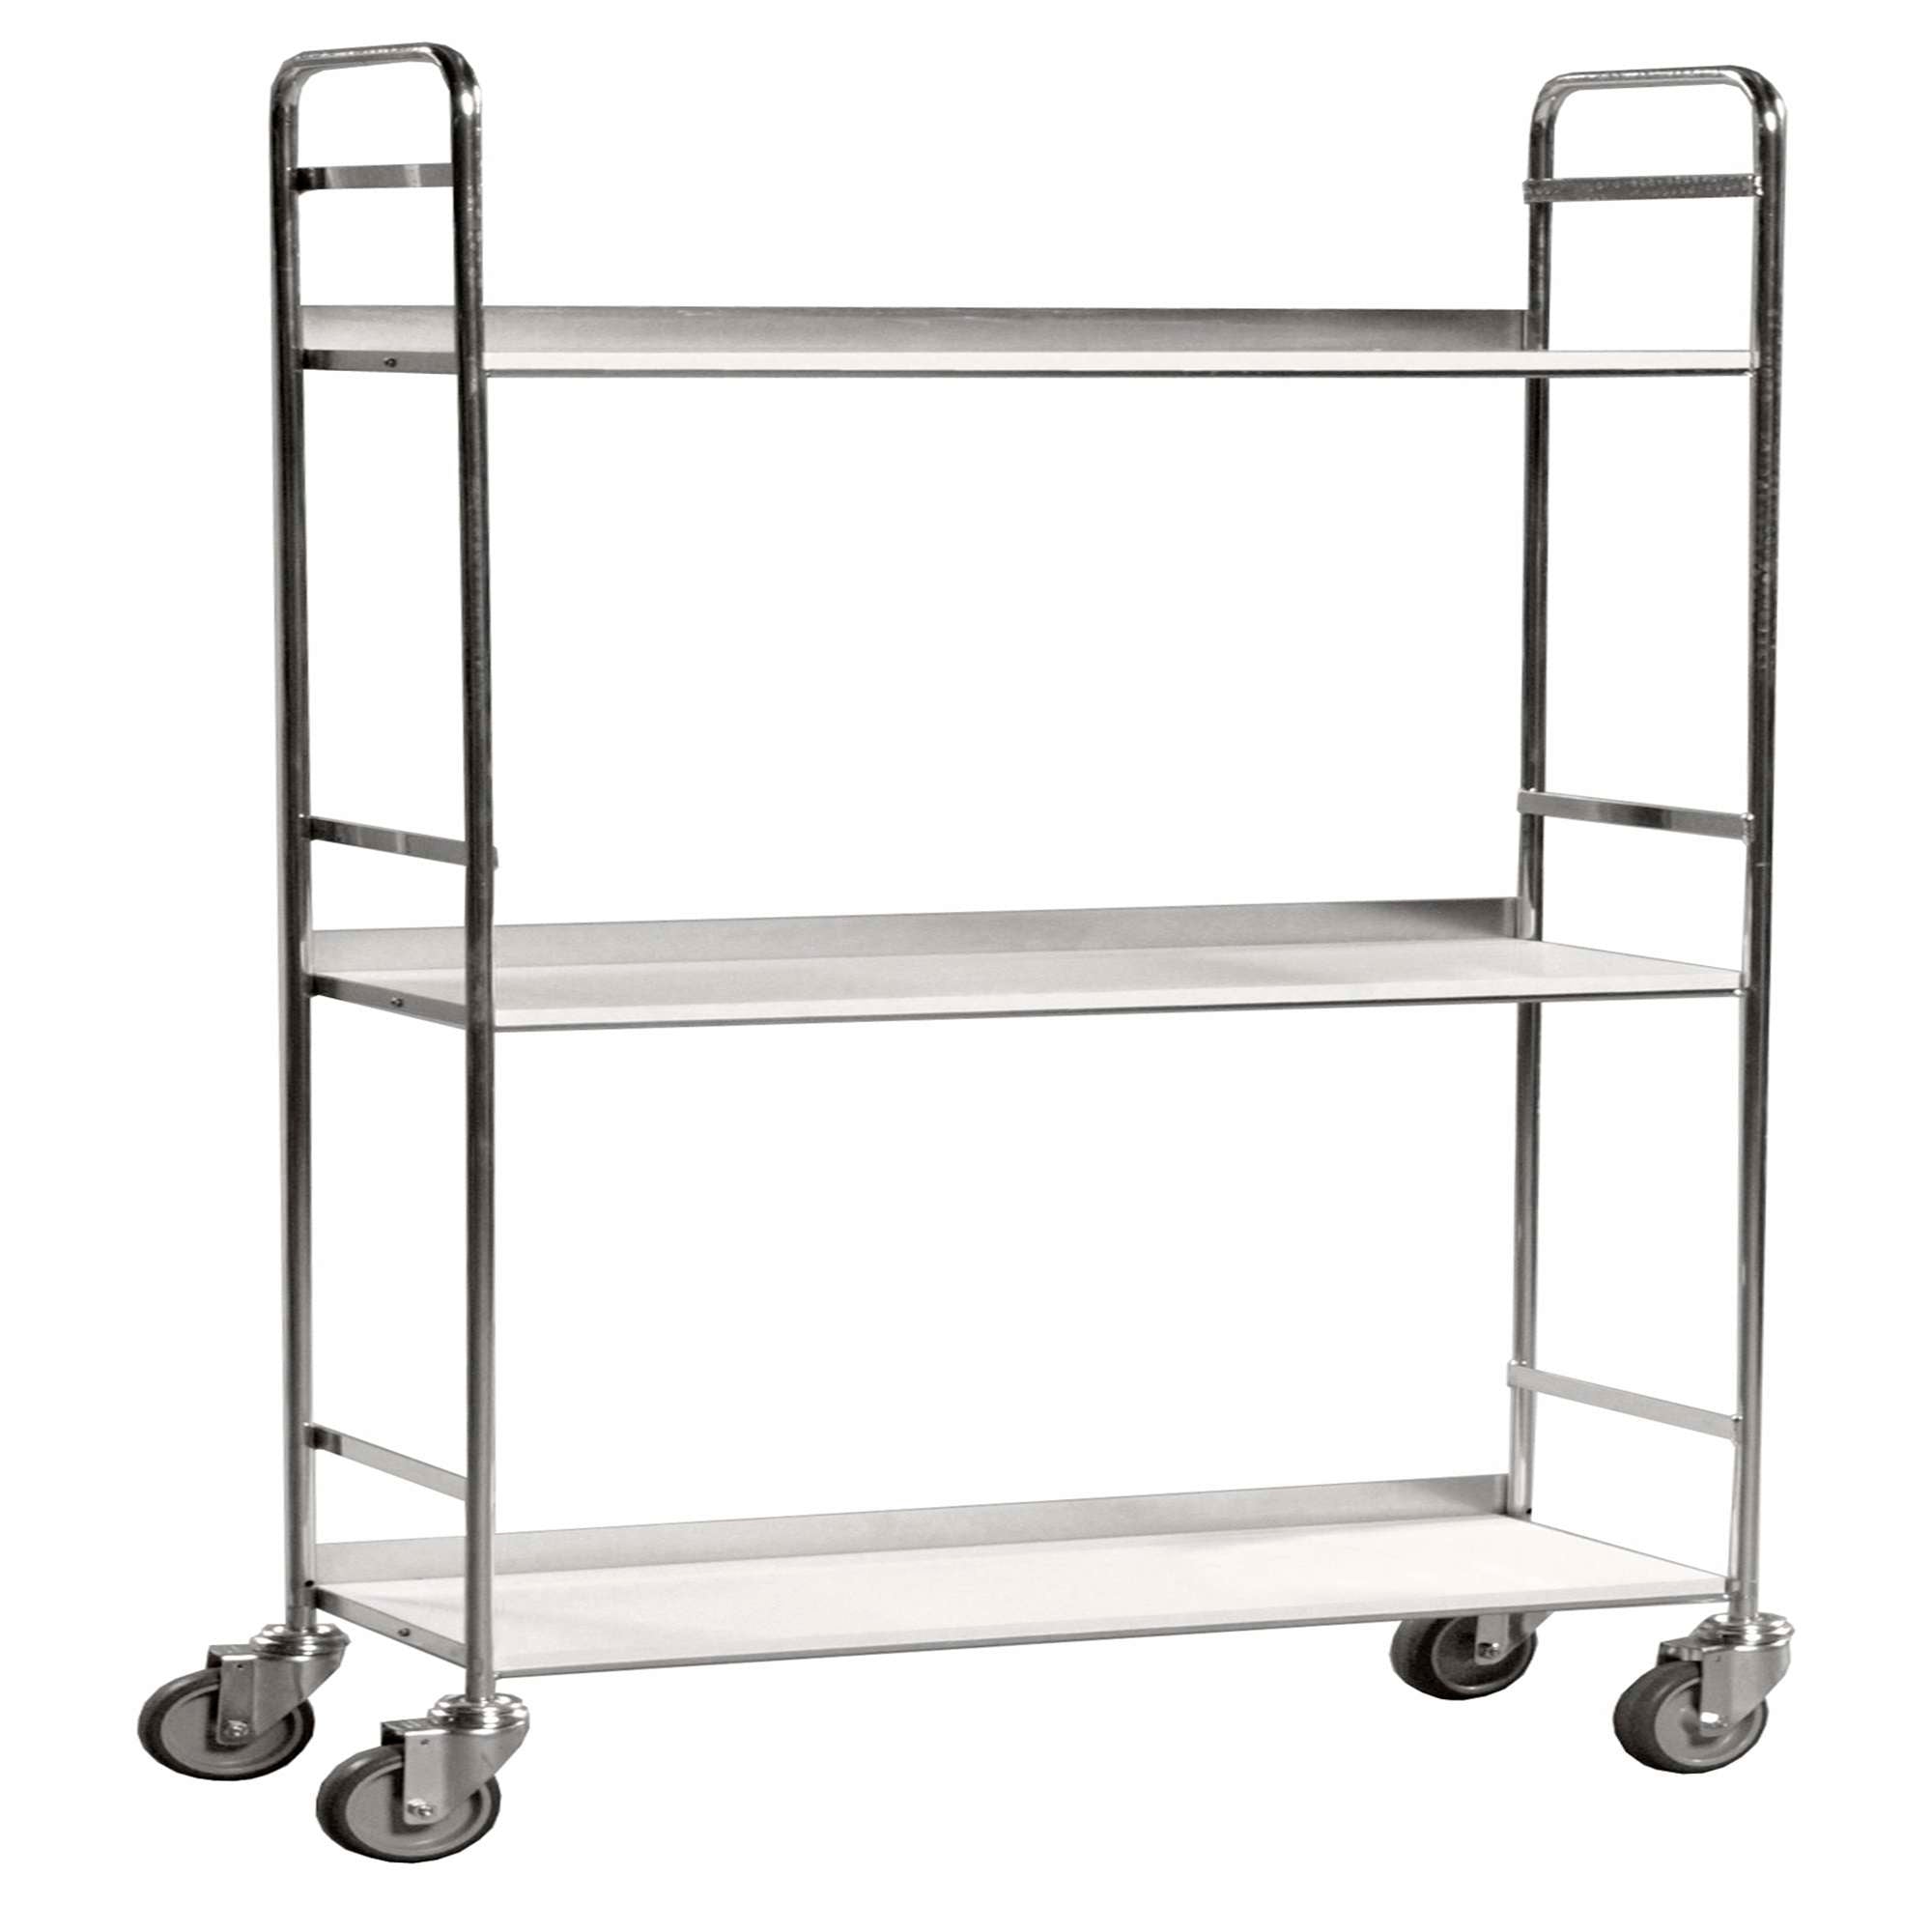 Moving shelf, Moveable shelf trolley with 2 shelves LxWxH (mm) 790 x 290 x 1500